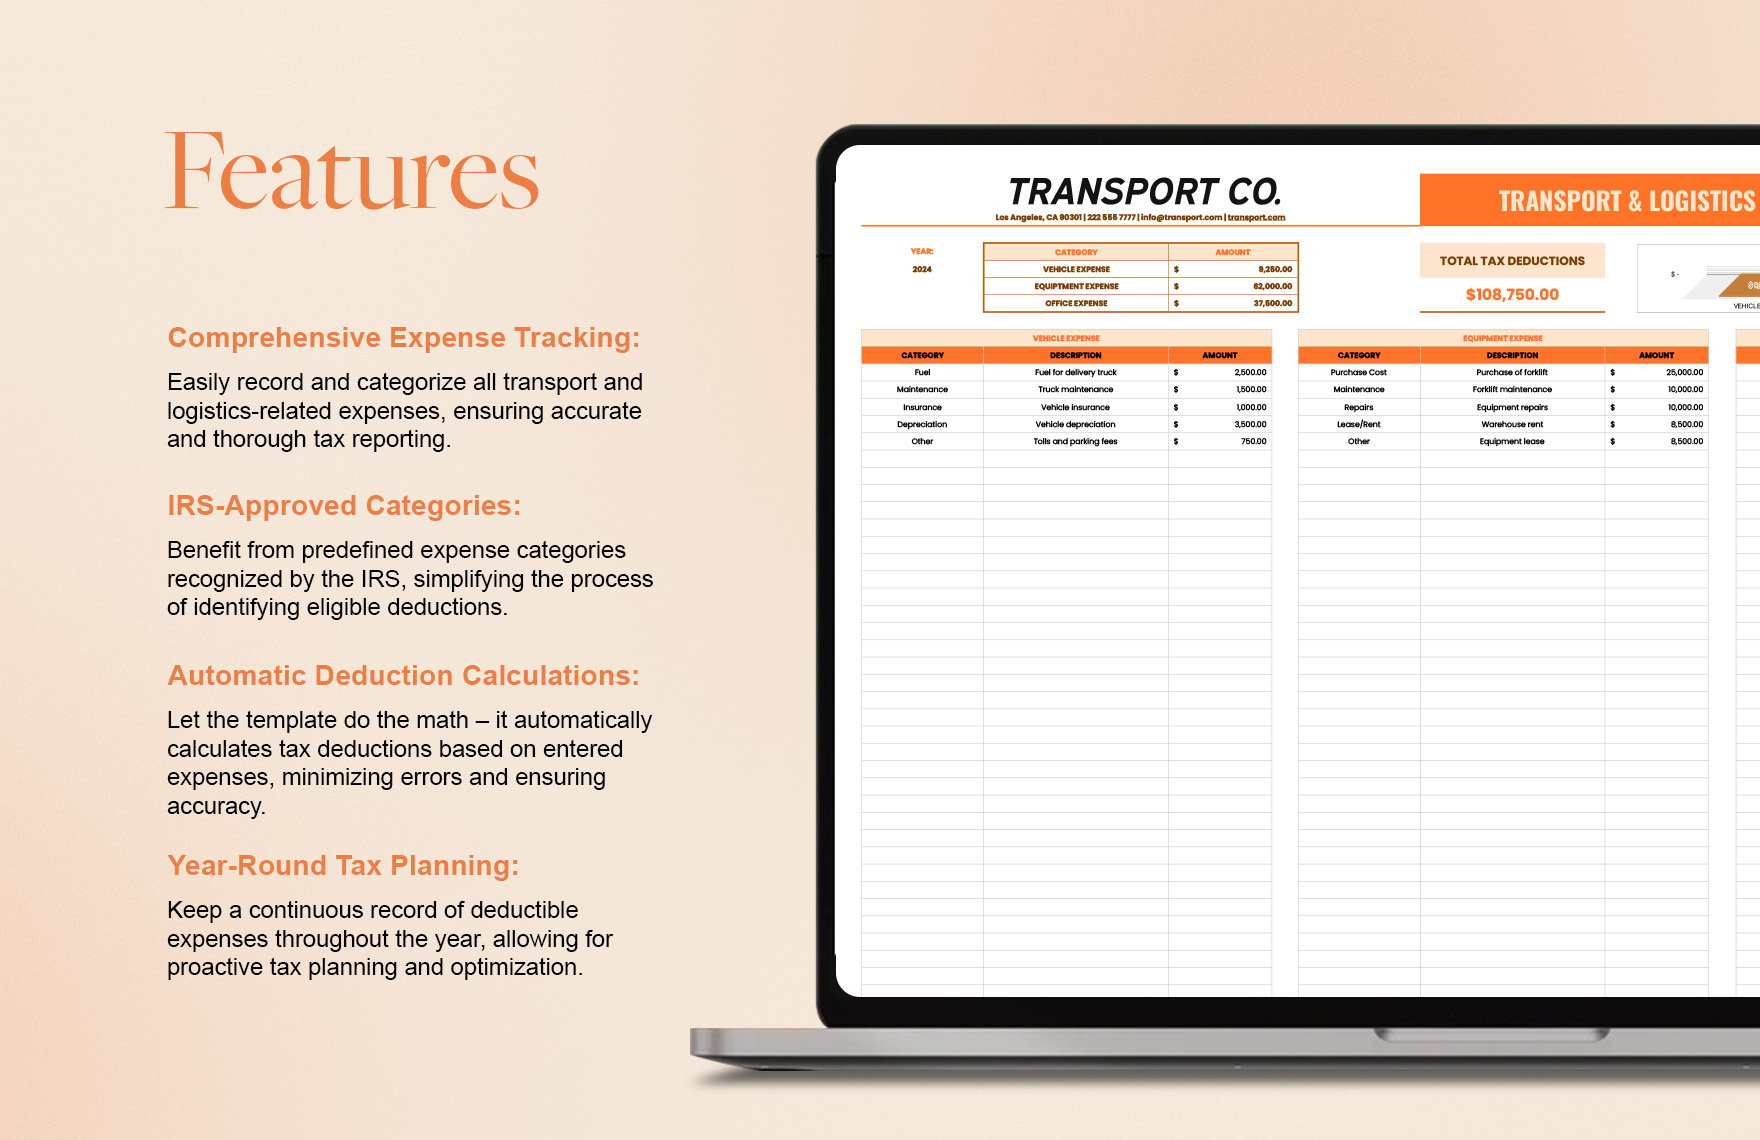 Transport and Logistics Tax Deductions Worksheet Template